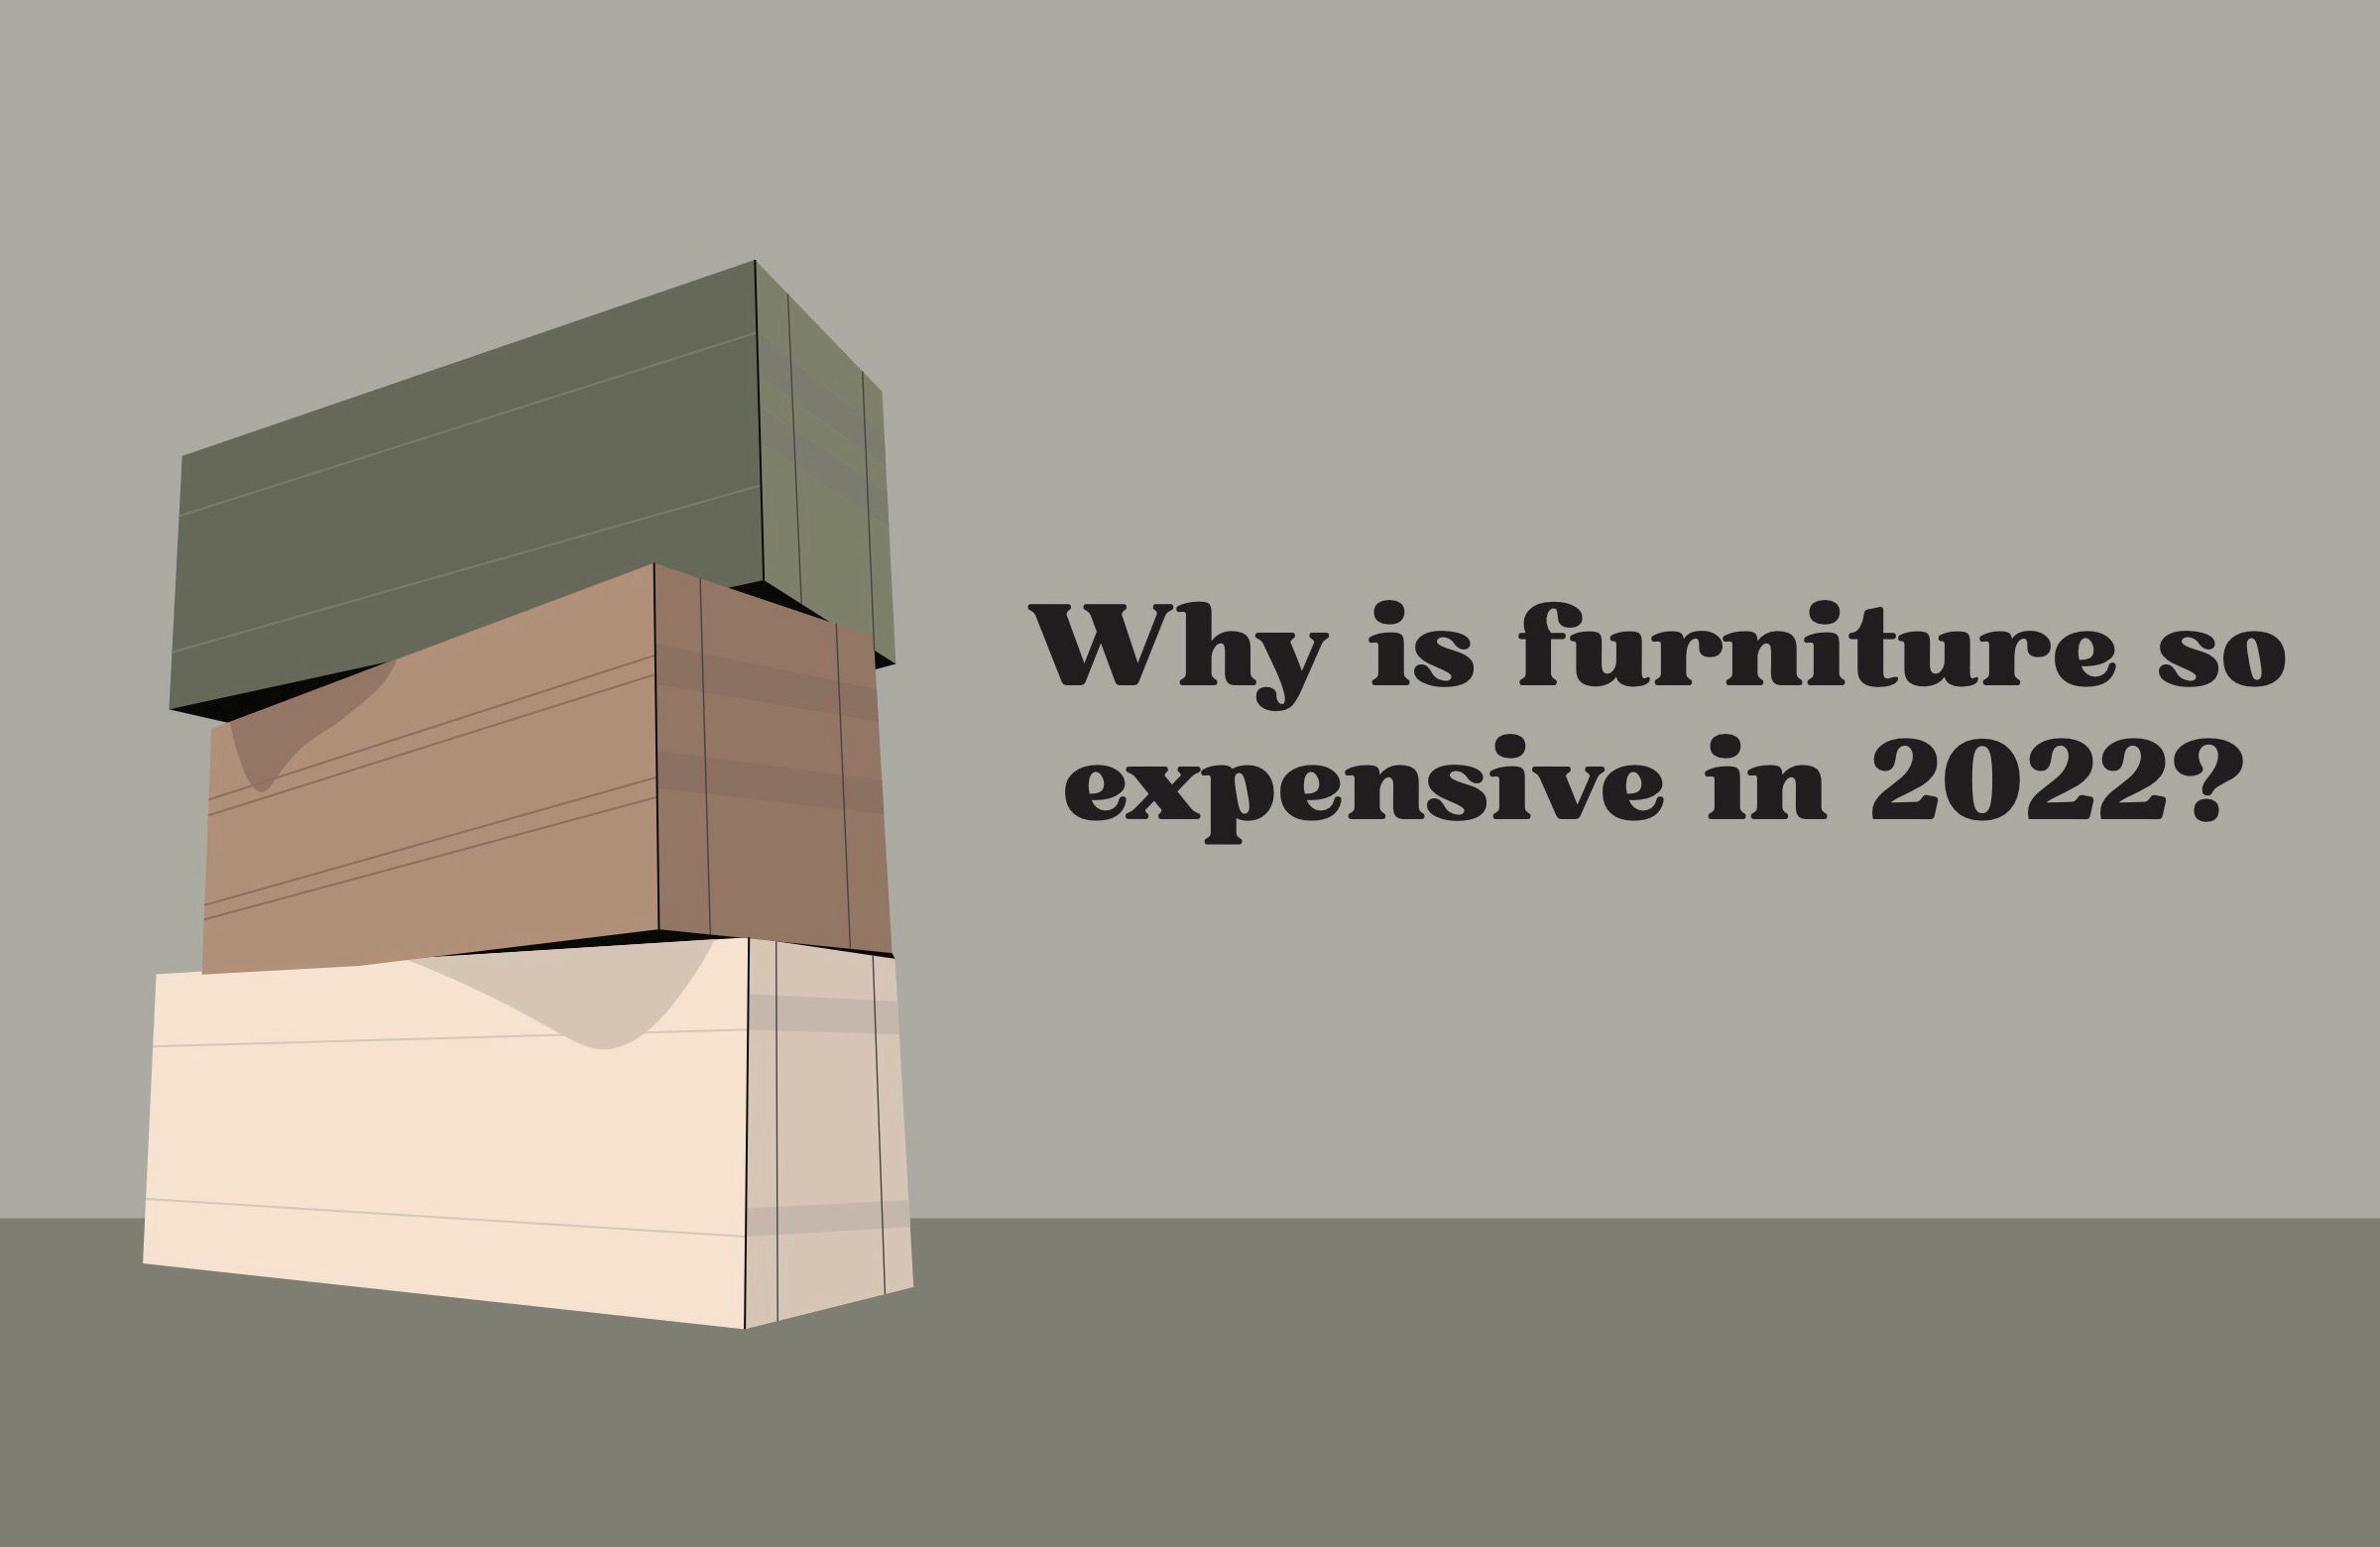 Why is Furniture so Expensive in 2022?